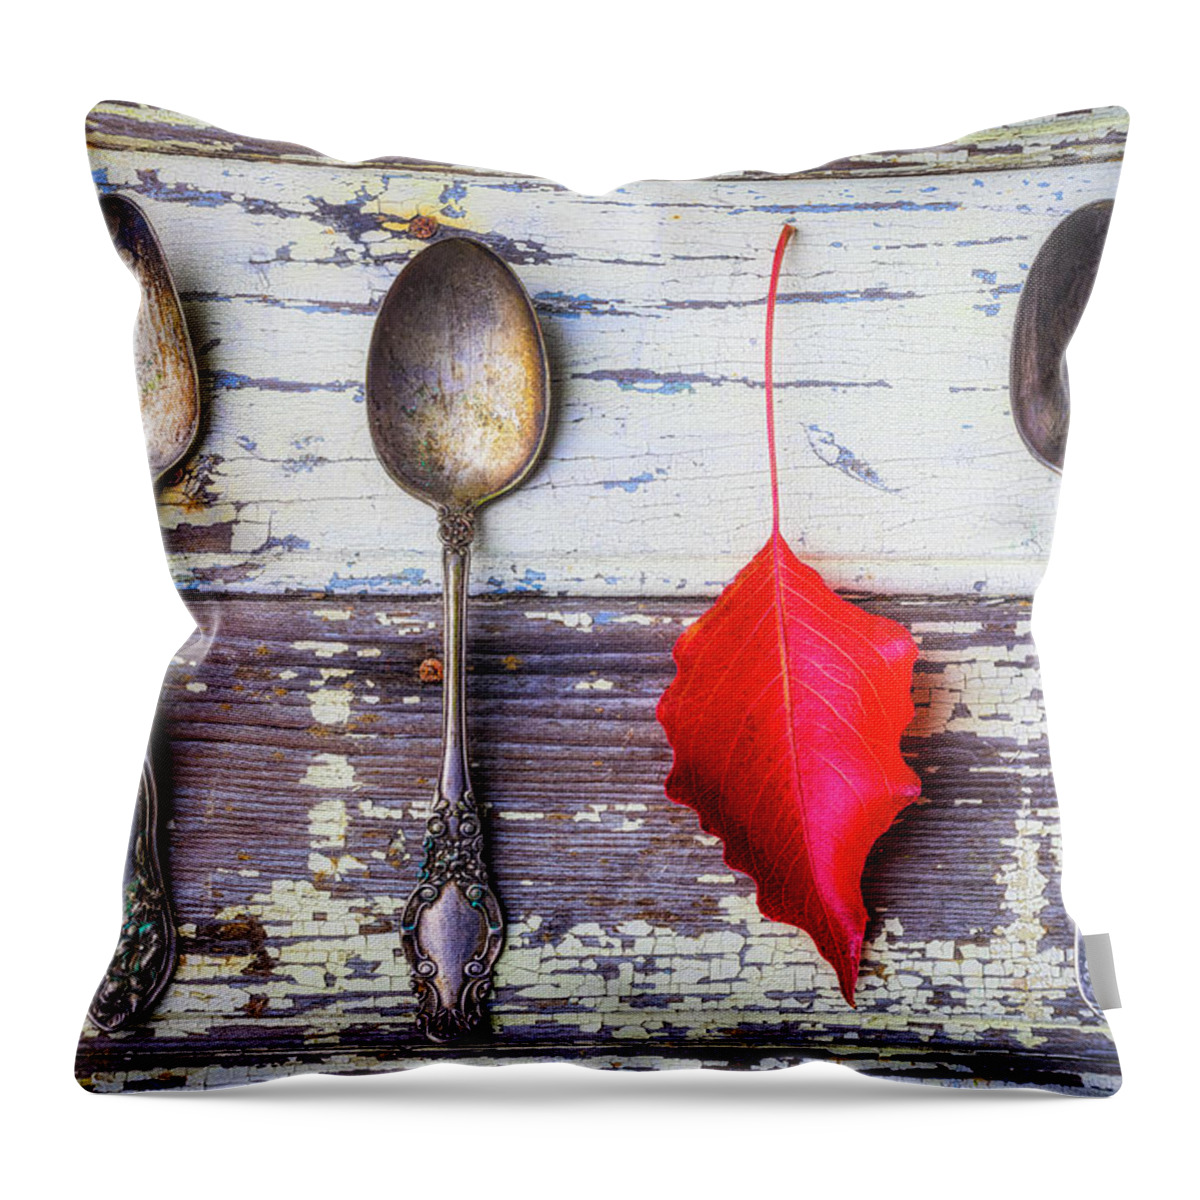 Red Throw Pillow featuring the photograph Three Spoons And A Red Leaf by Garry Gay